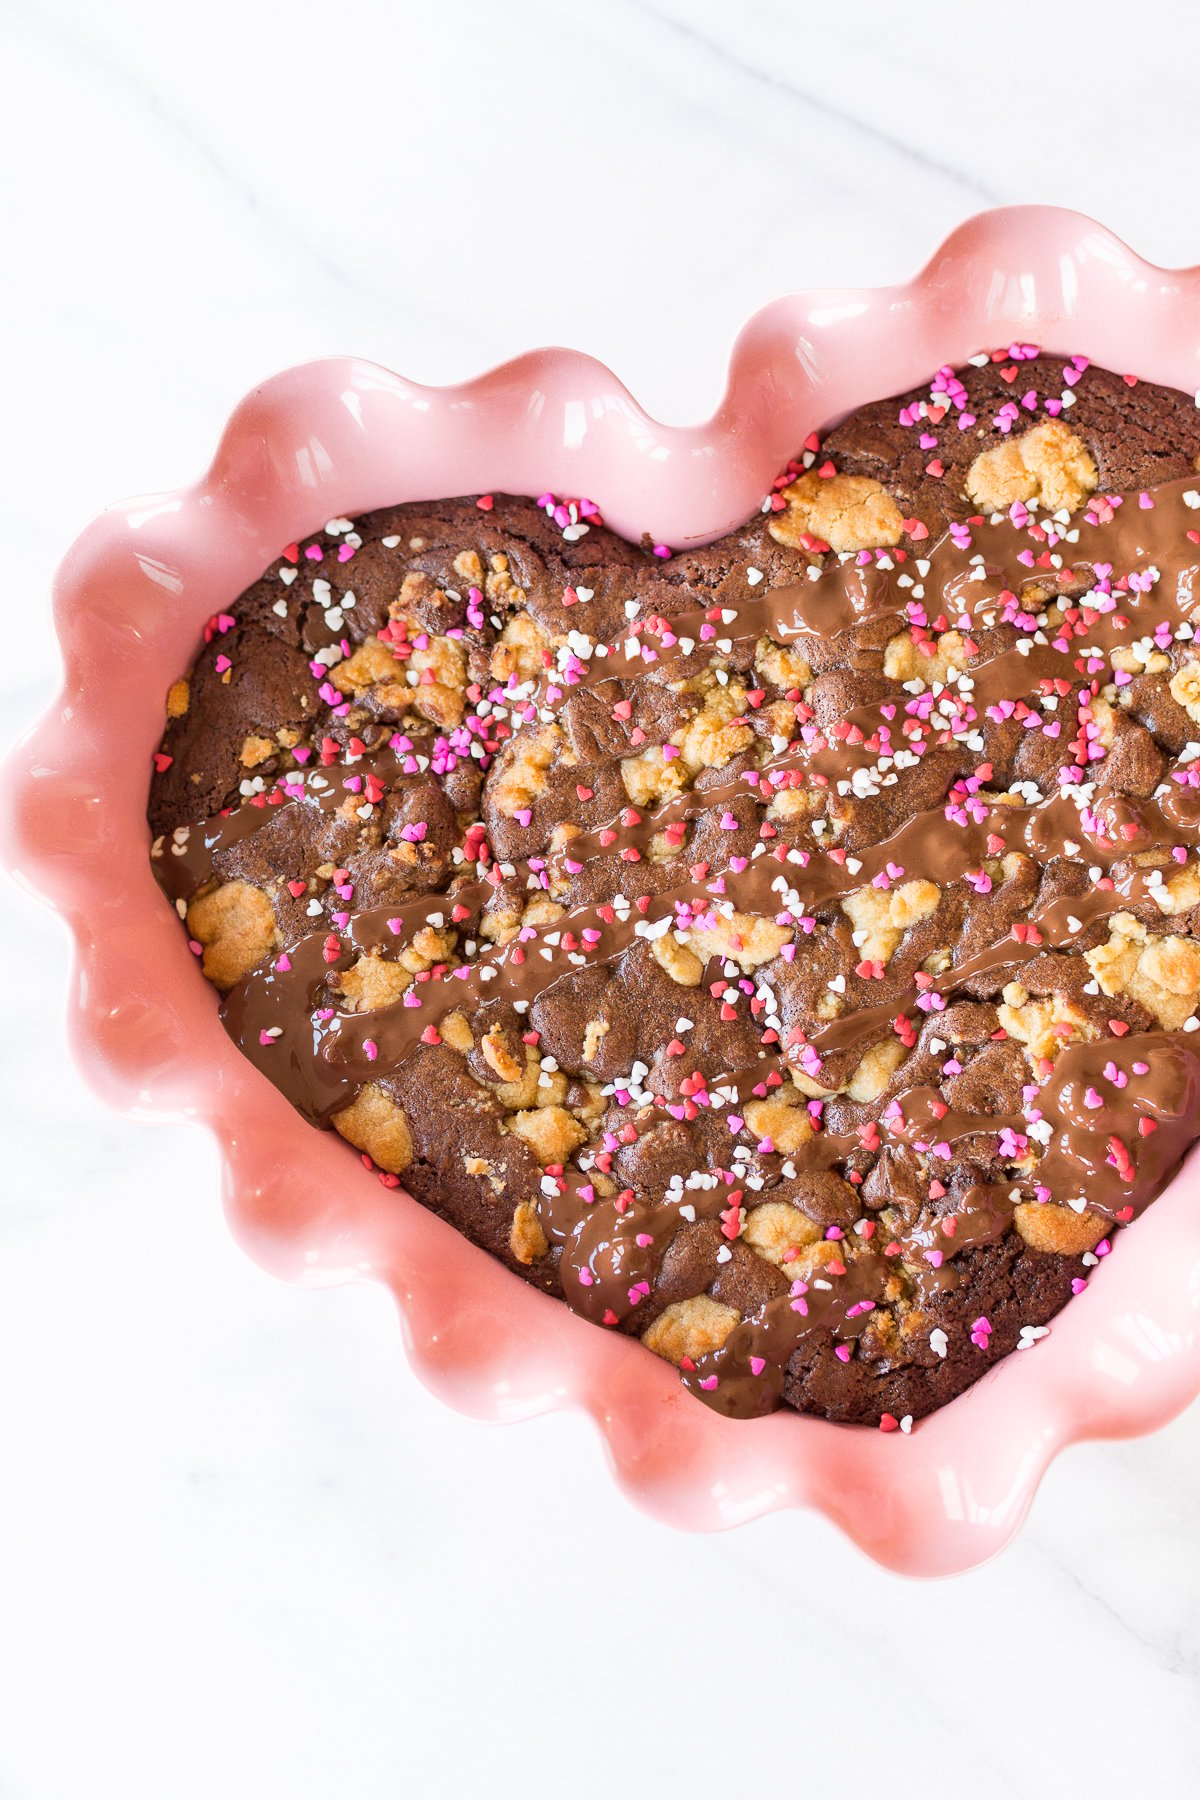 A heart-shaped chocolate brookie in a pink ceramic dish, topped with nuts and colorful sprinkles on a marble surface.